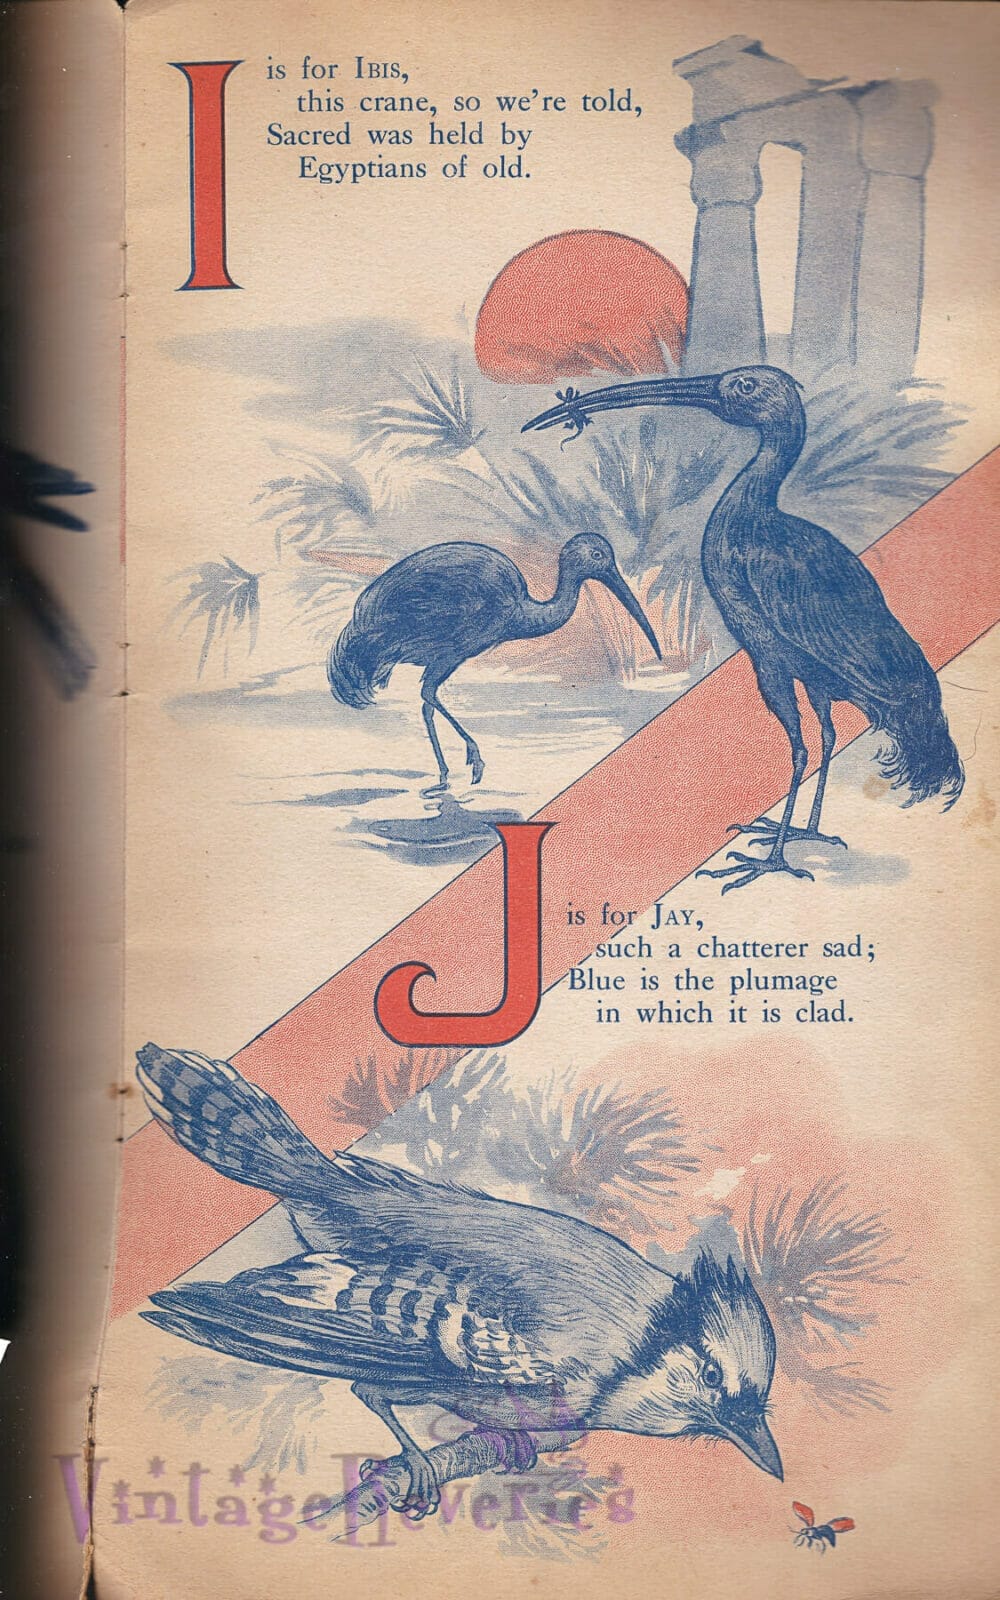 1916 book about birds